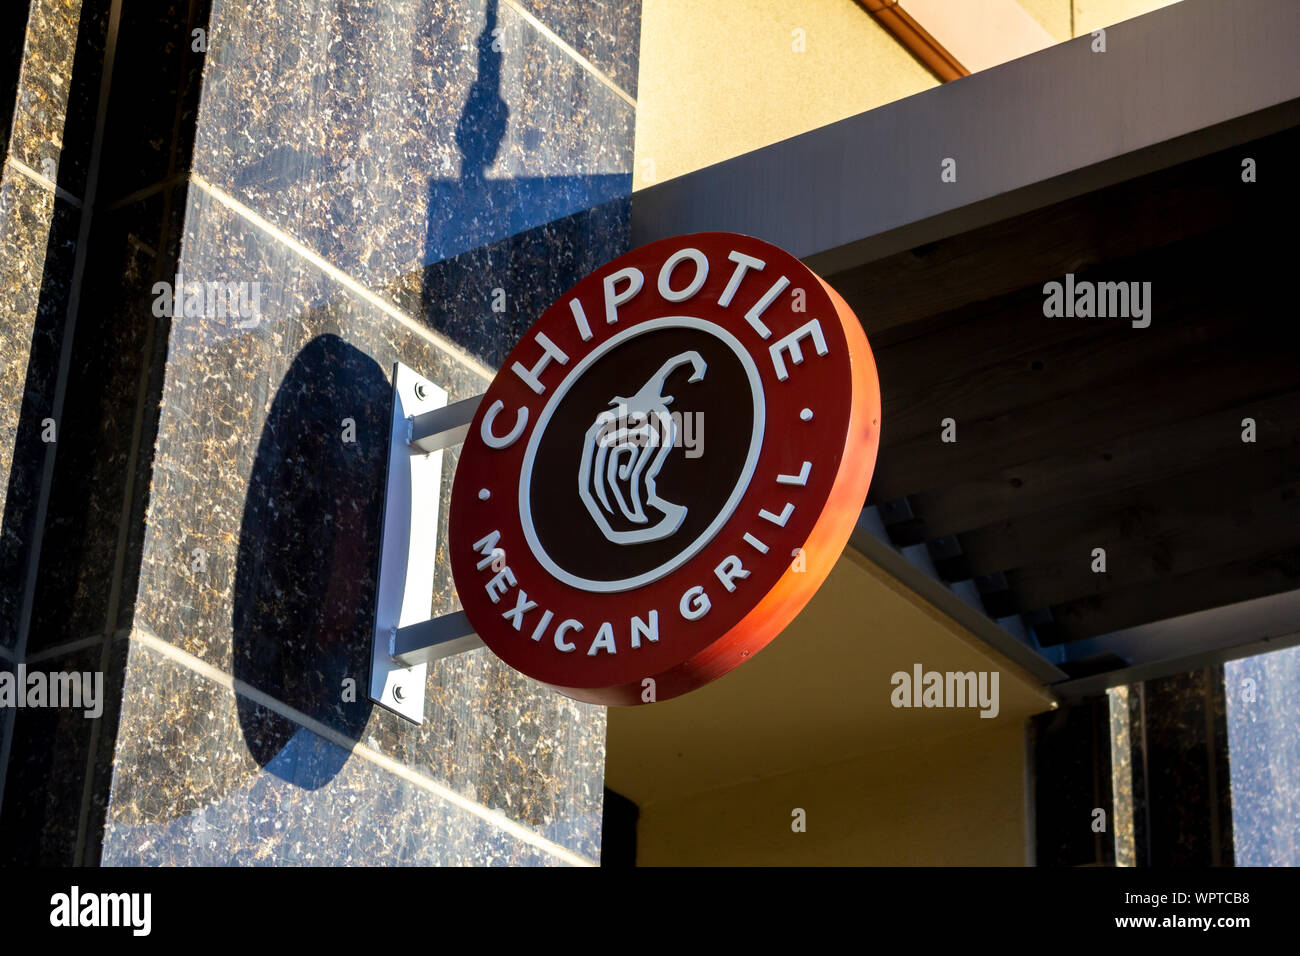 Los Angeles, California, United States - 02-22-2019: A store front sign for the fast food restaurant known as Chipotle Mexican Grill. Stock Photo